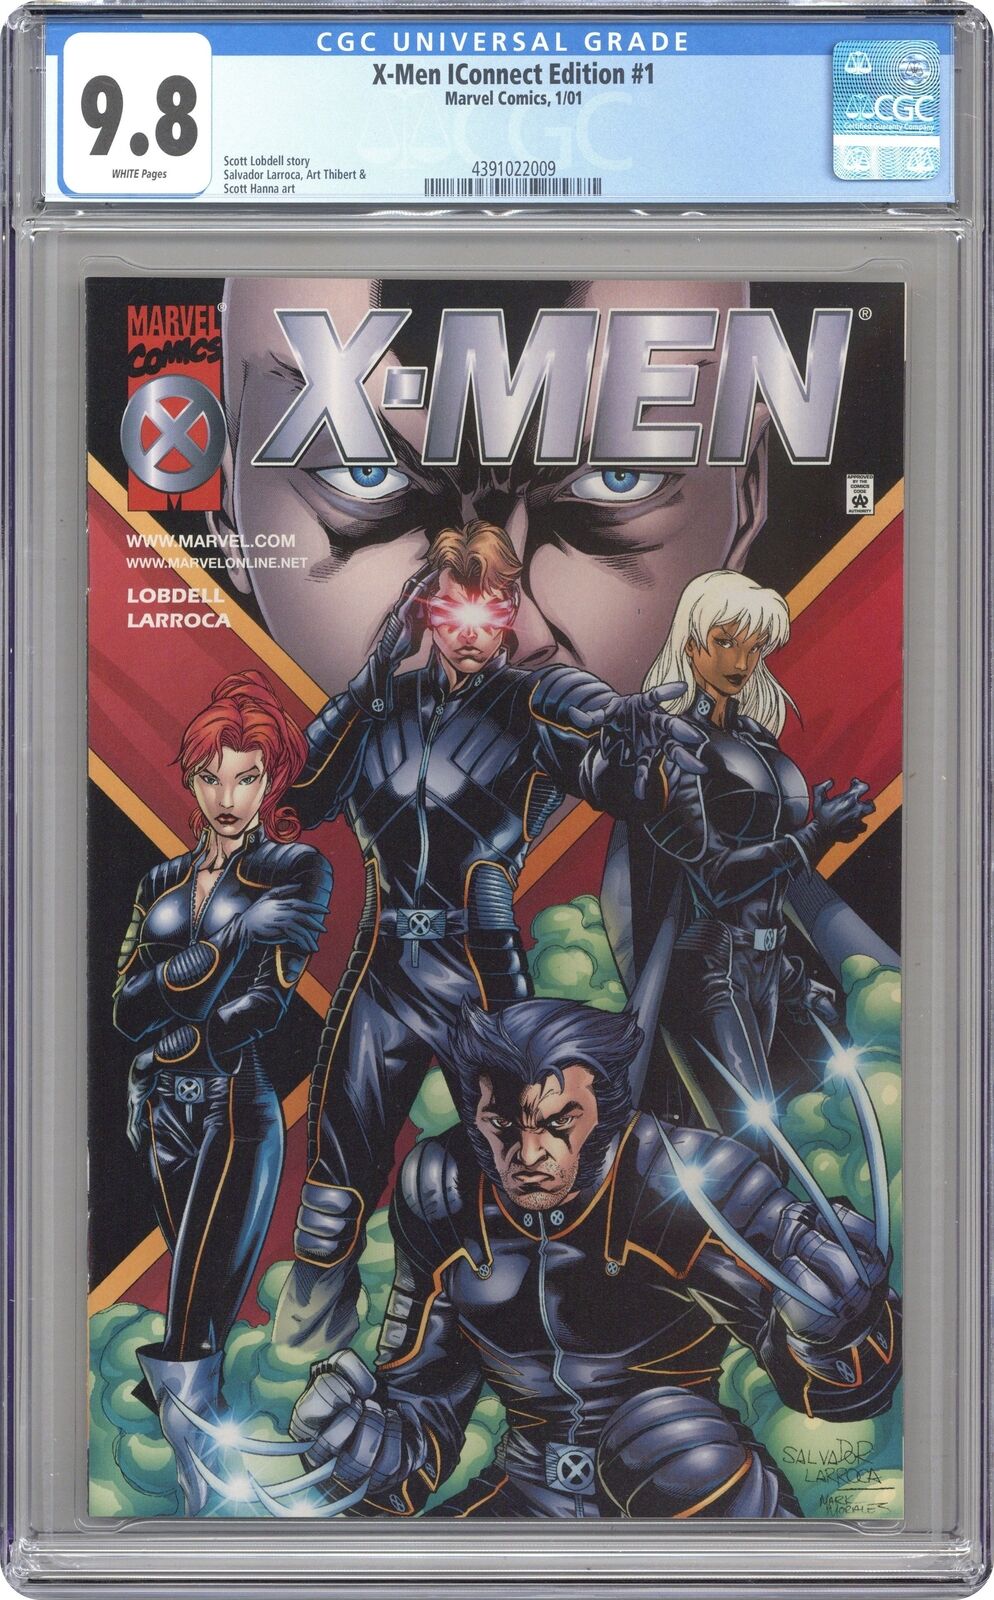 X-Men The Movie Iconnect Special #1 CGC 9.8 2001 4391022009